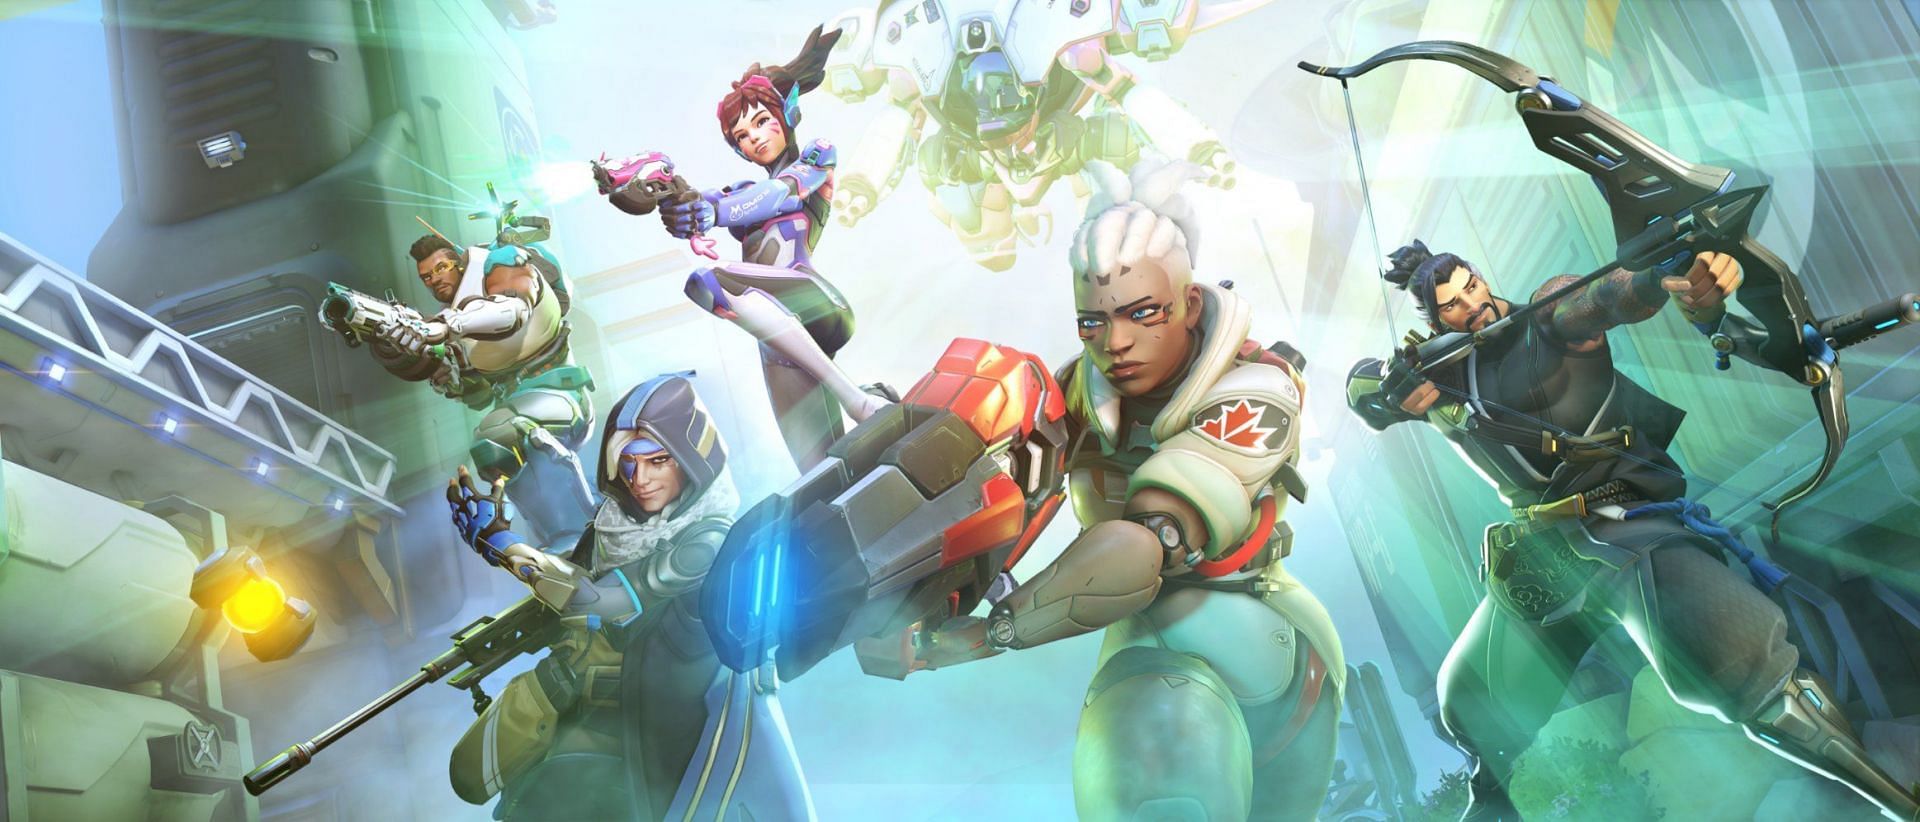 While Overwatch 2 gameplay is fun, the accompanying progression systems do not feel rewarding (Image via Blizzard Entertainment)